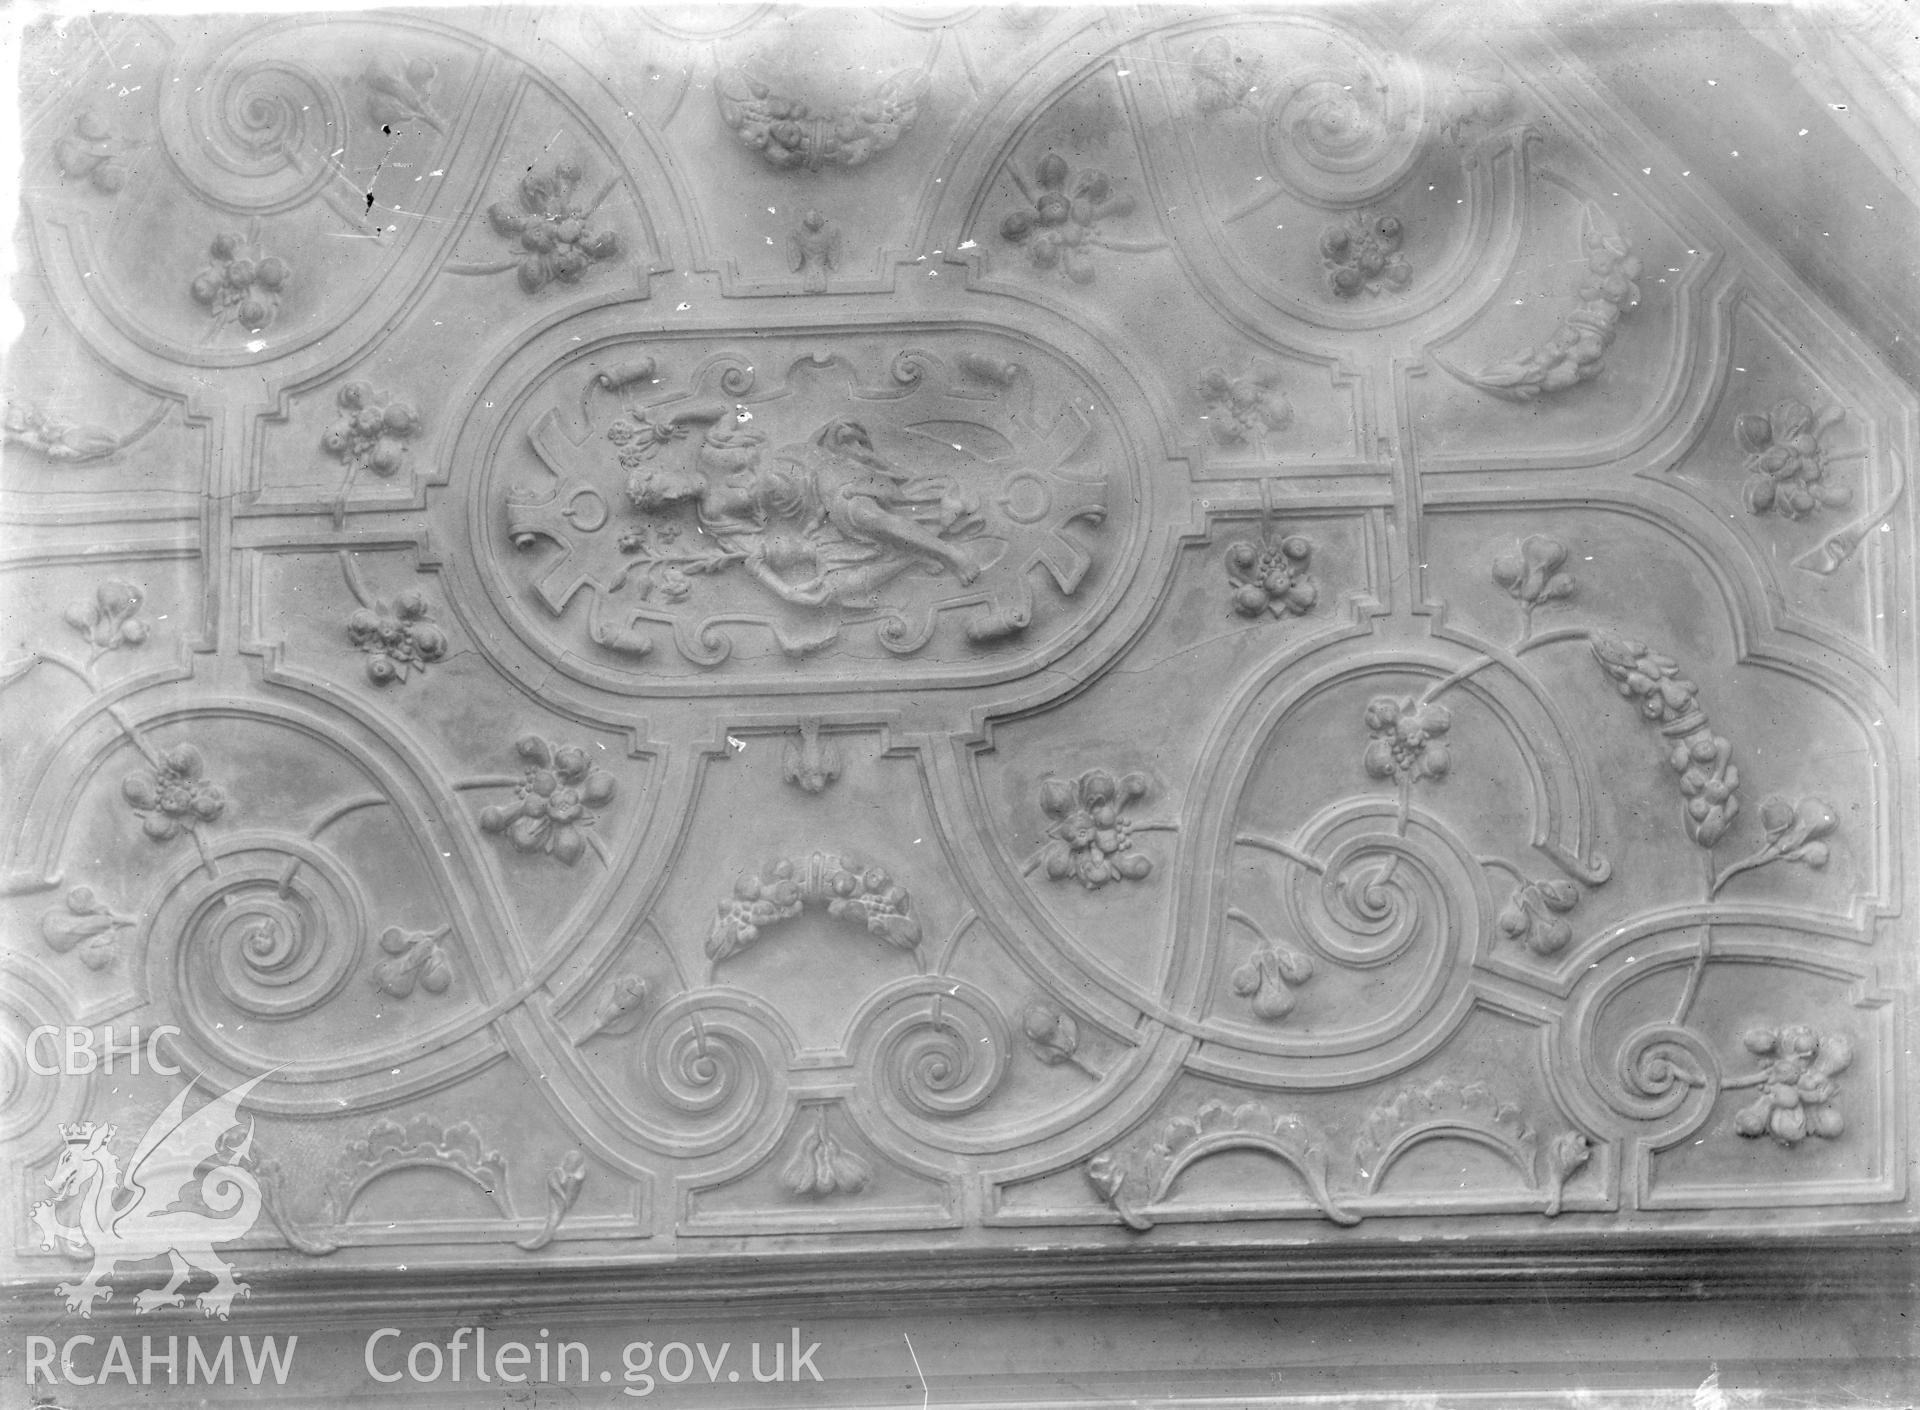 Black and white glass negative showing decorative ceiling at an unidentified location.